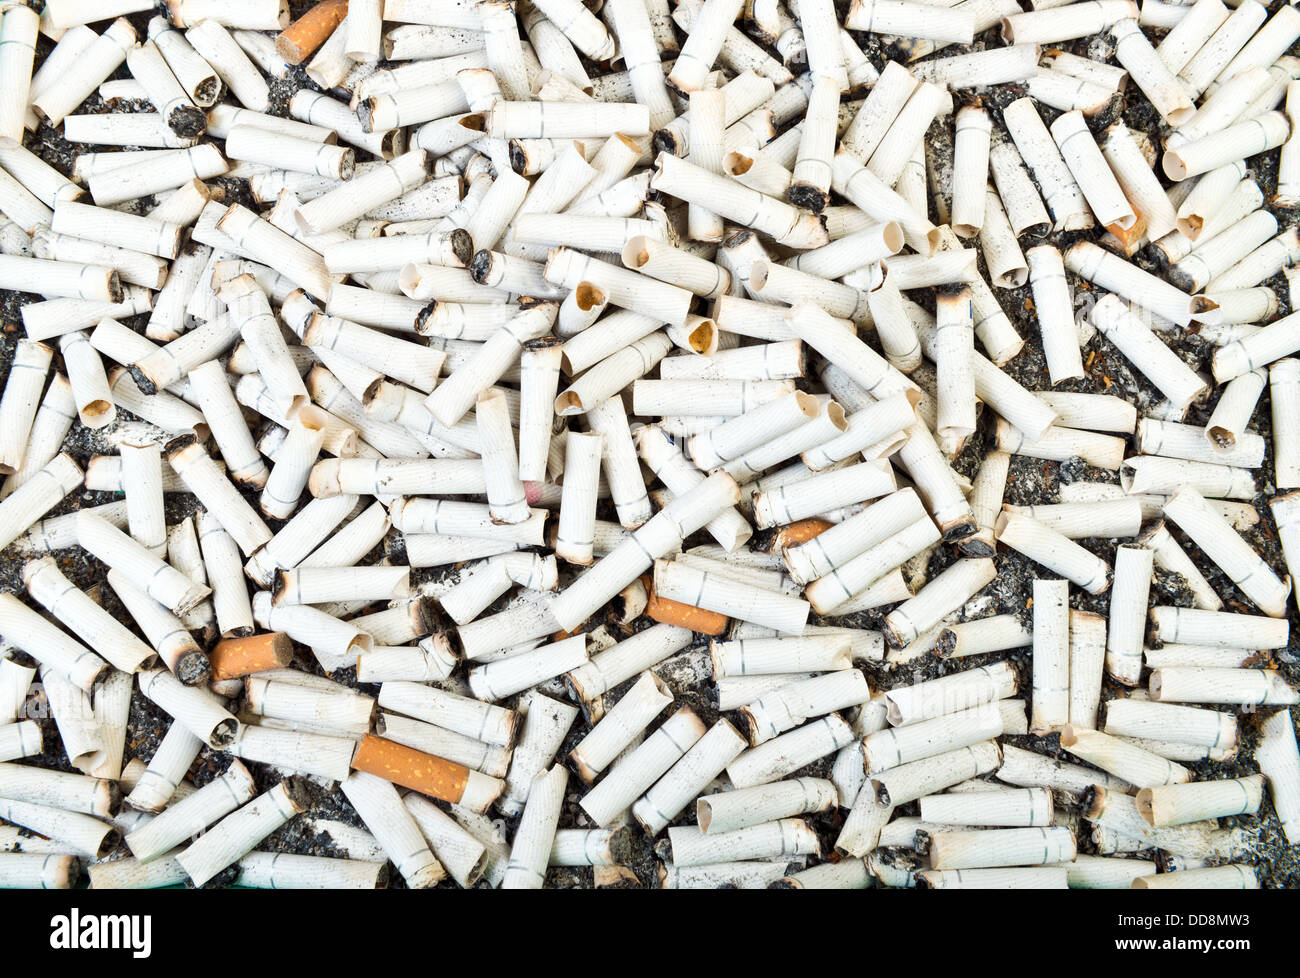 Two hundred dirty cigarette butts background Stock Photo